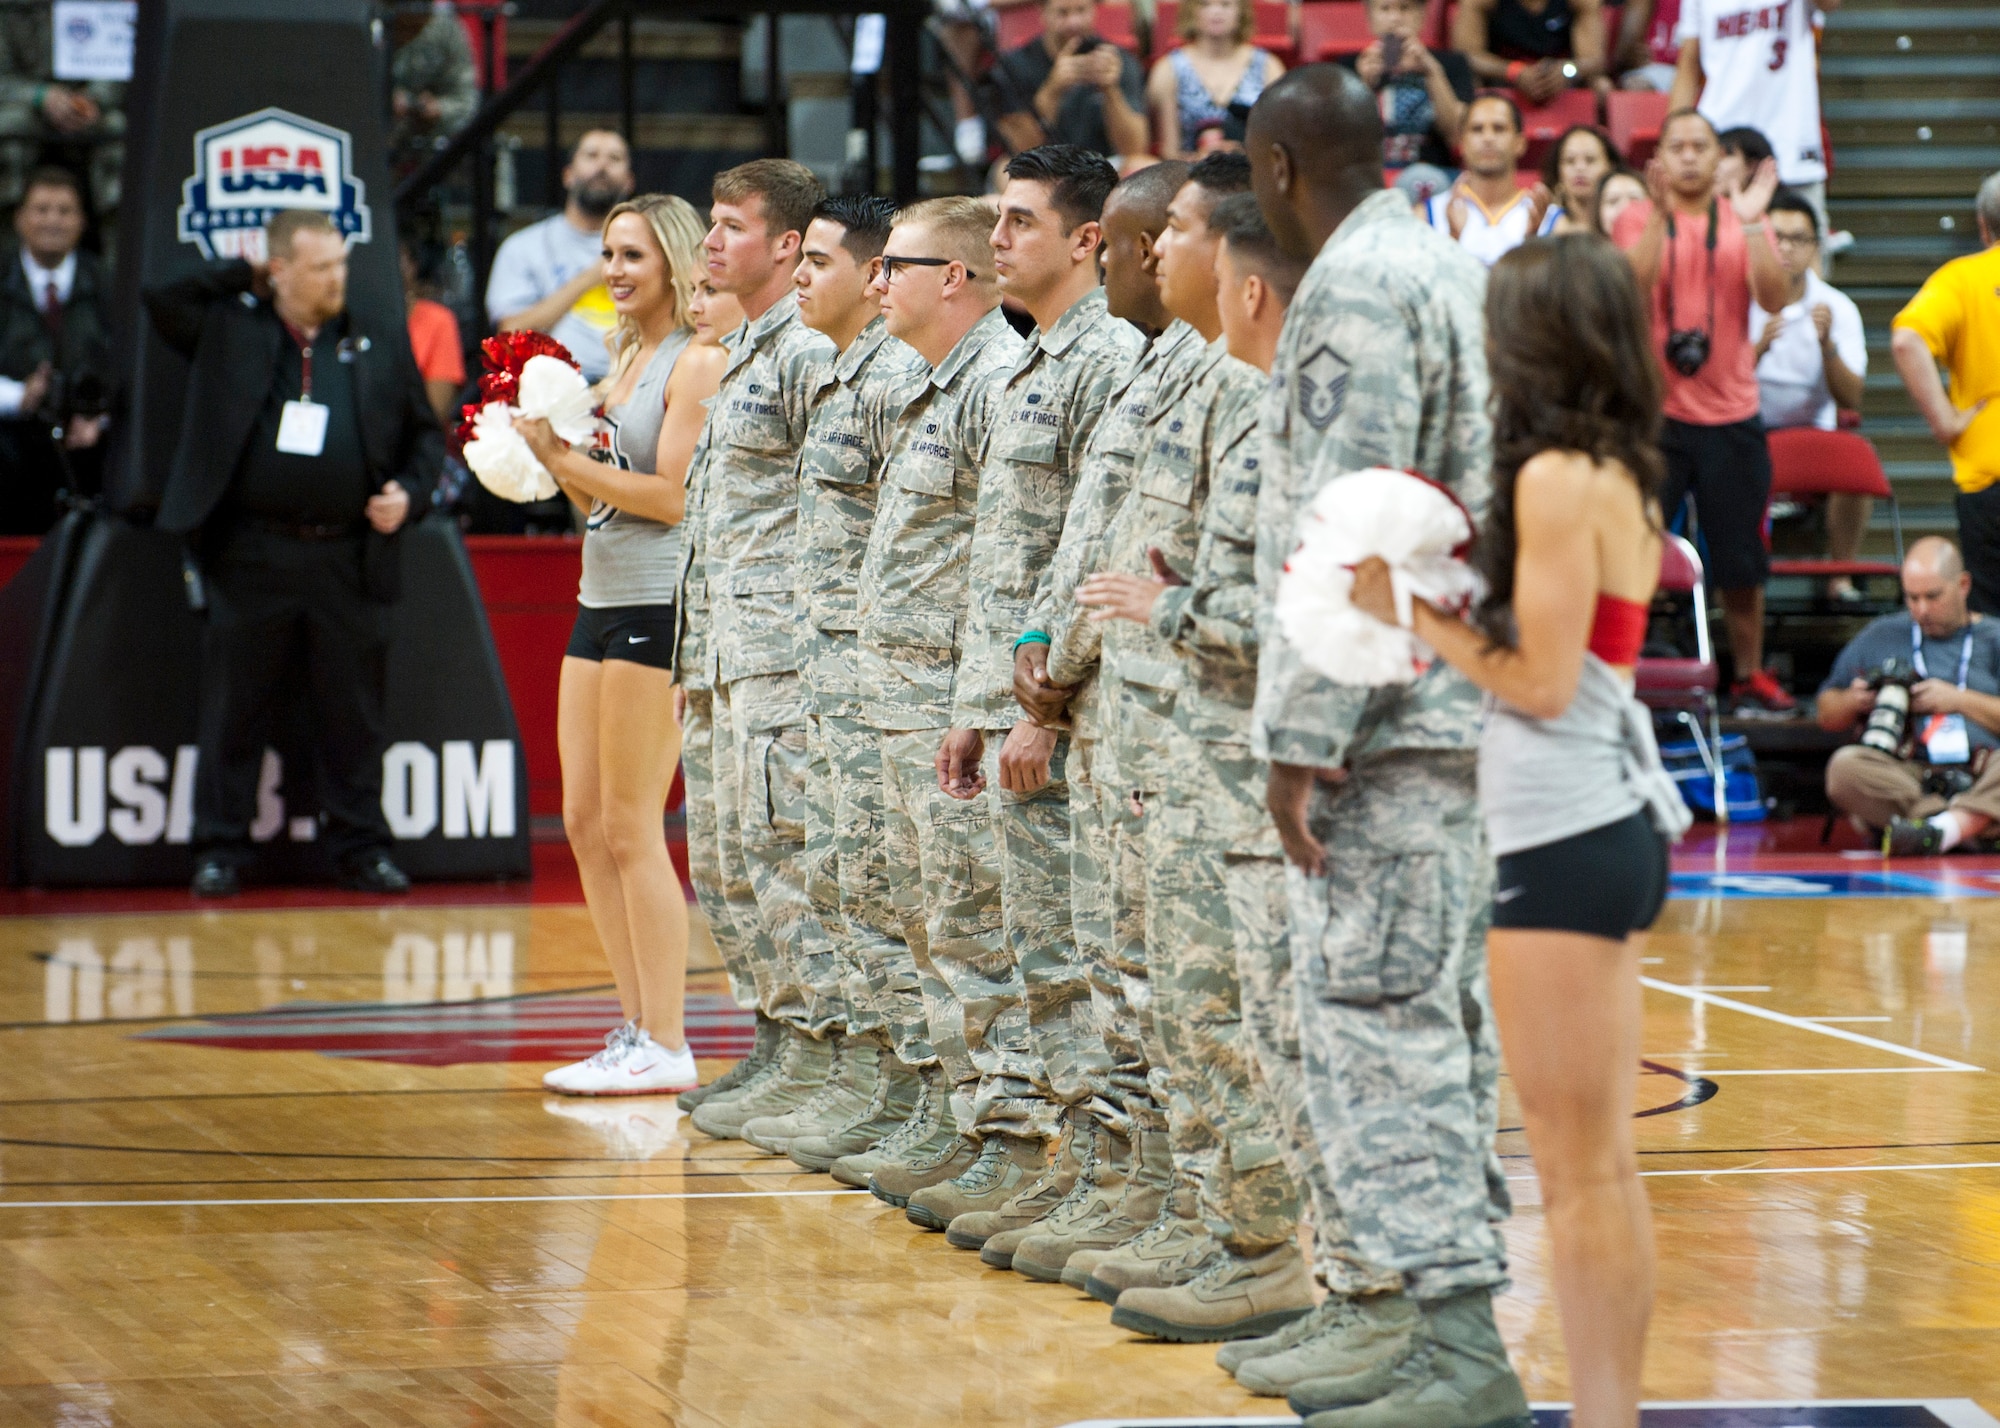 Nellis Air Force Base Airmen, who recently returned from deployment, were recognized for their efforts during a time out at a USA Basketball Men’s National Team intra-squad scrimmage at the Thomas and Mack center in Las Vegas, August 1, 2014. The Airmen are returning from deployments to Southwest Asia. (U.S. Air Force photo by Airman 1st Class Thomas Spangler)